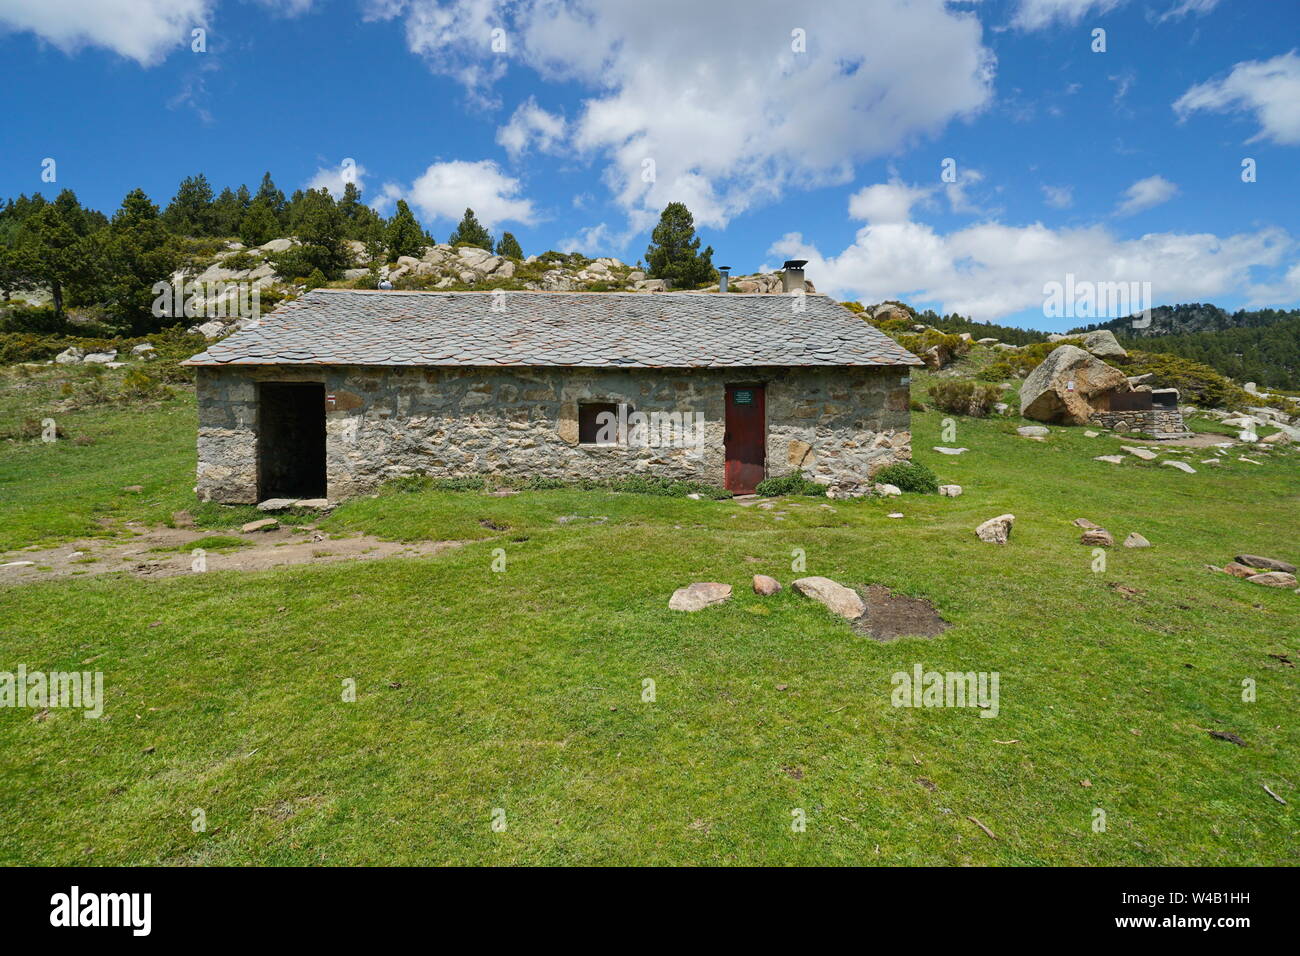 Shelter in the mountain, Pyrenees-Orientales, France, natural park of the Catalan Pyrenees Stock Photo